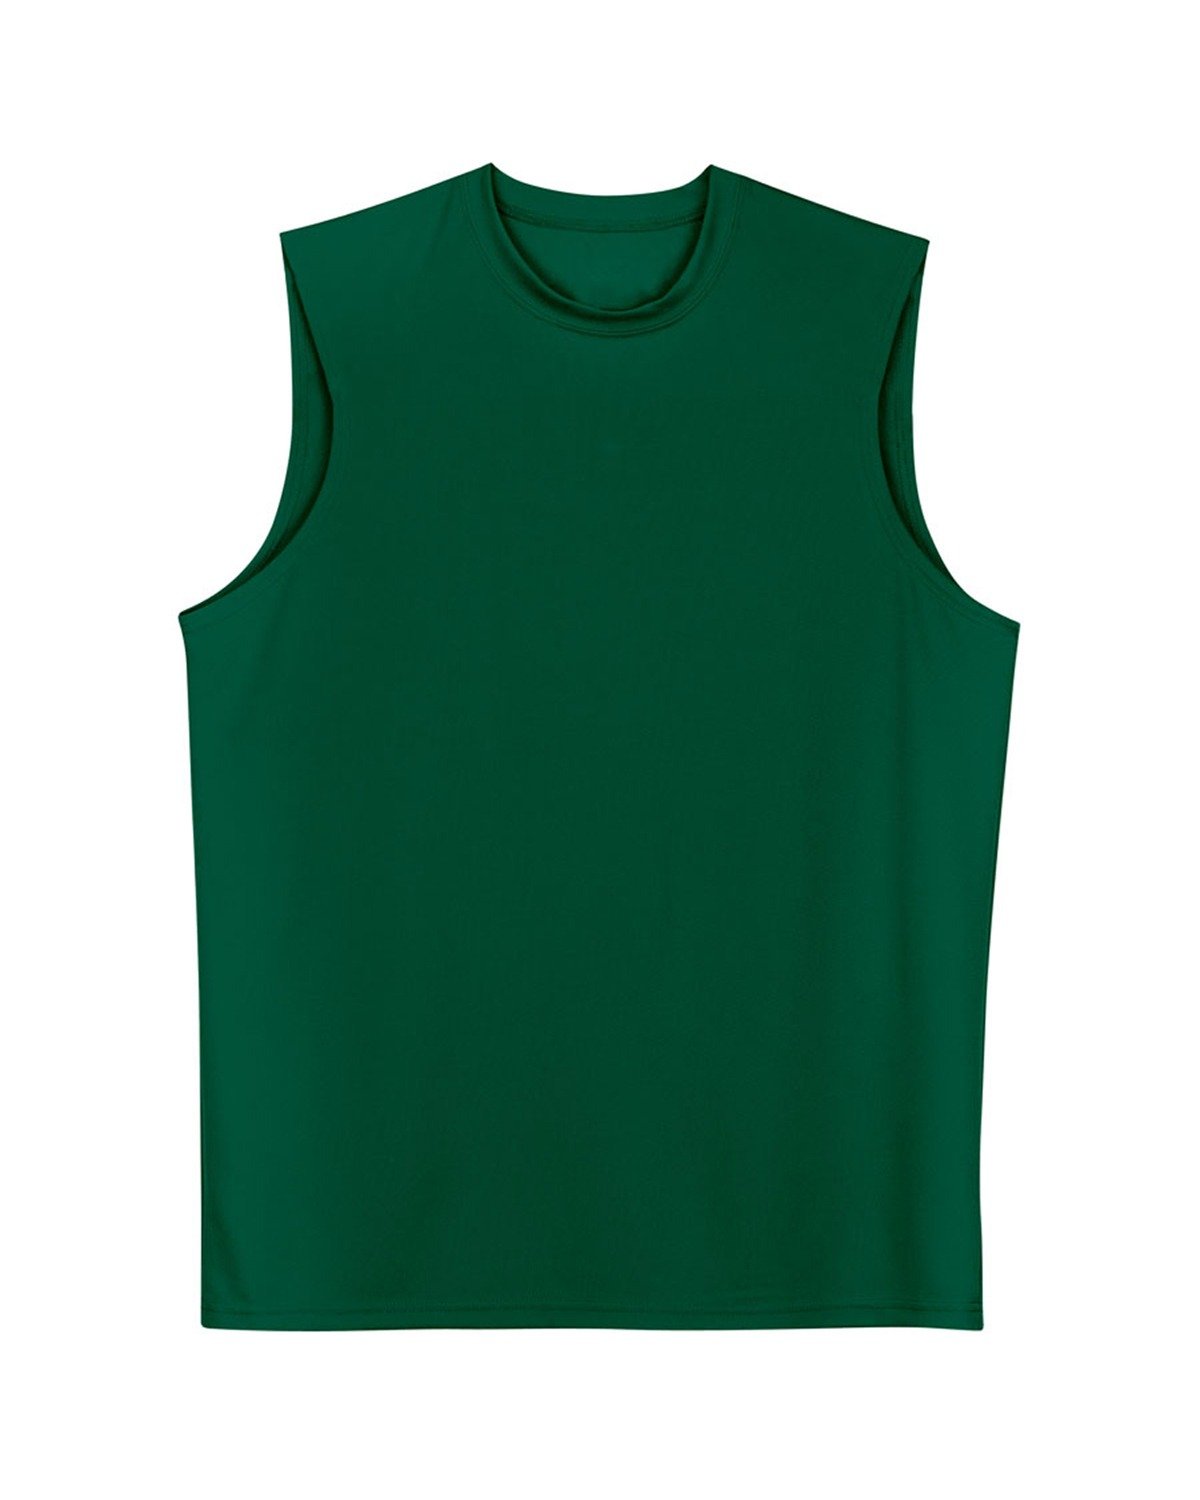 A4 Men's Cooling Performance Muscle T-Shirt FOREST GREEN 